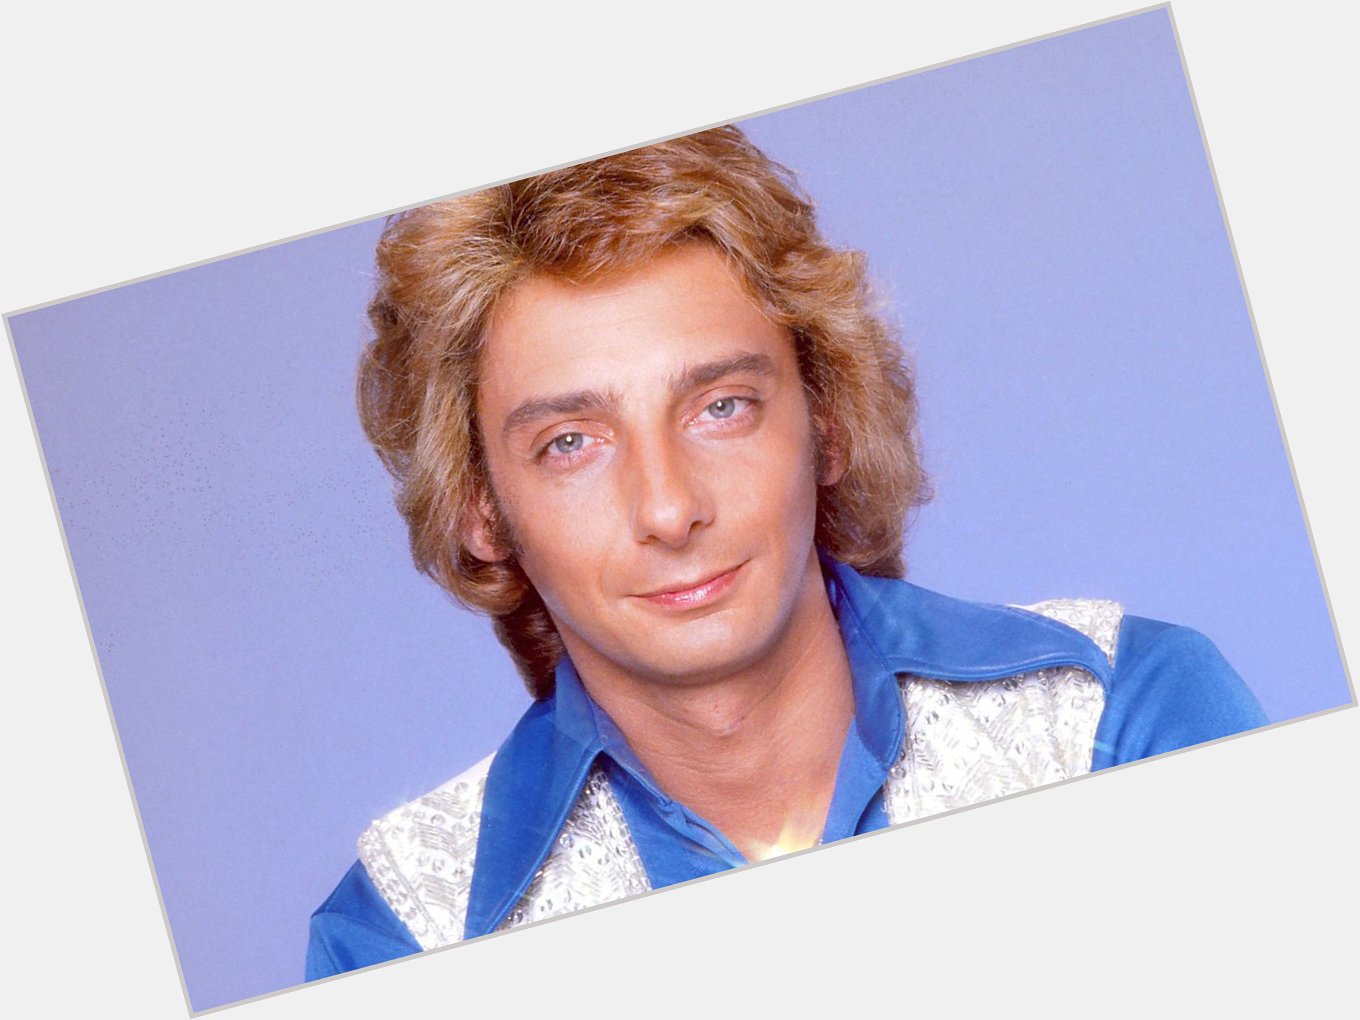 Big  to Barry Manilow, today in 1946! Have a day! 